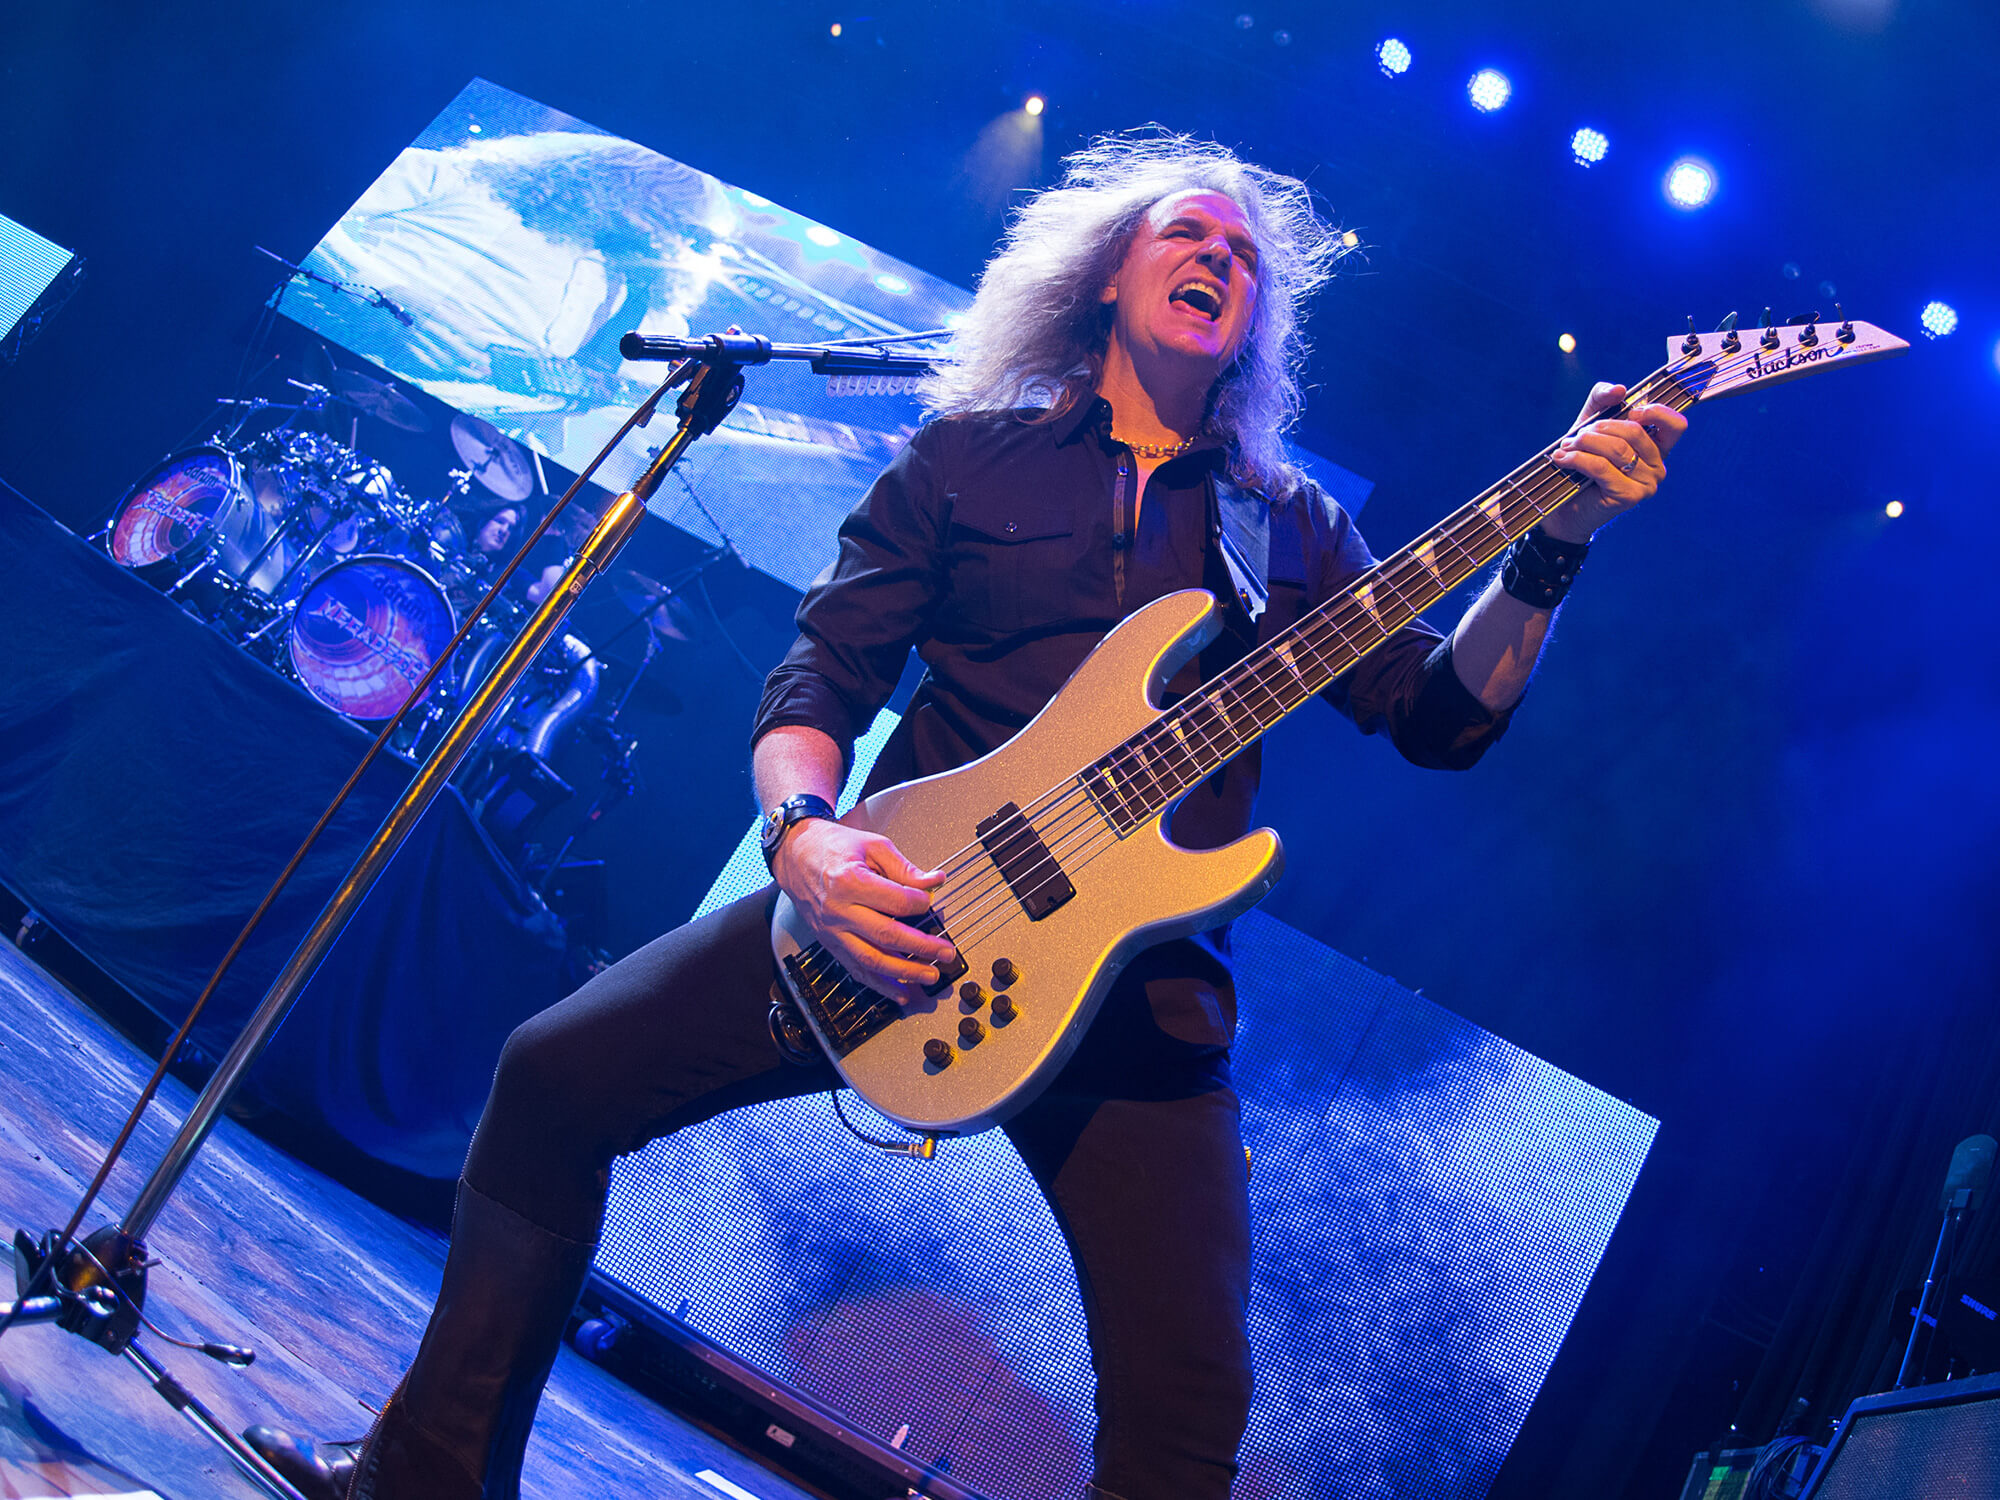 David Ellefson on his legacy with Megadeth “My DNA is all over that”